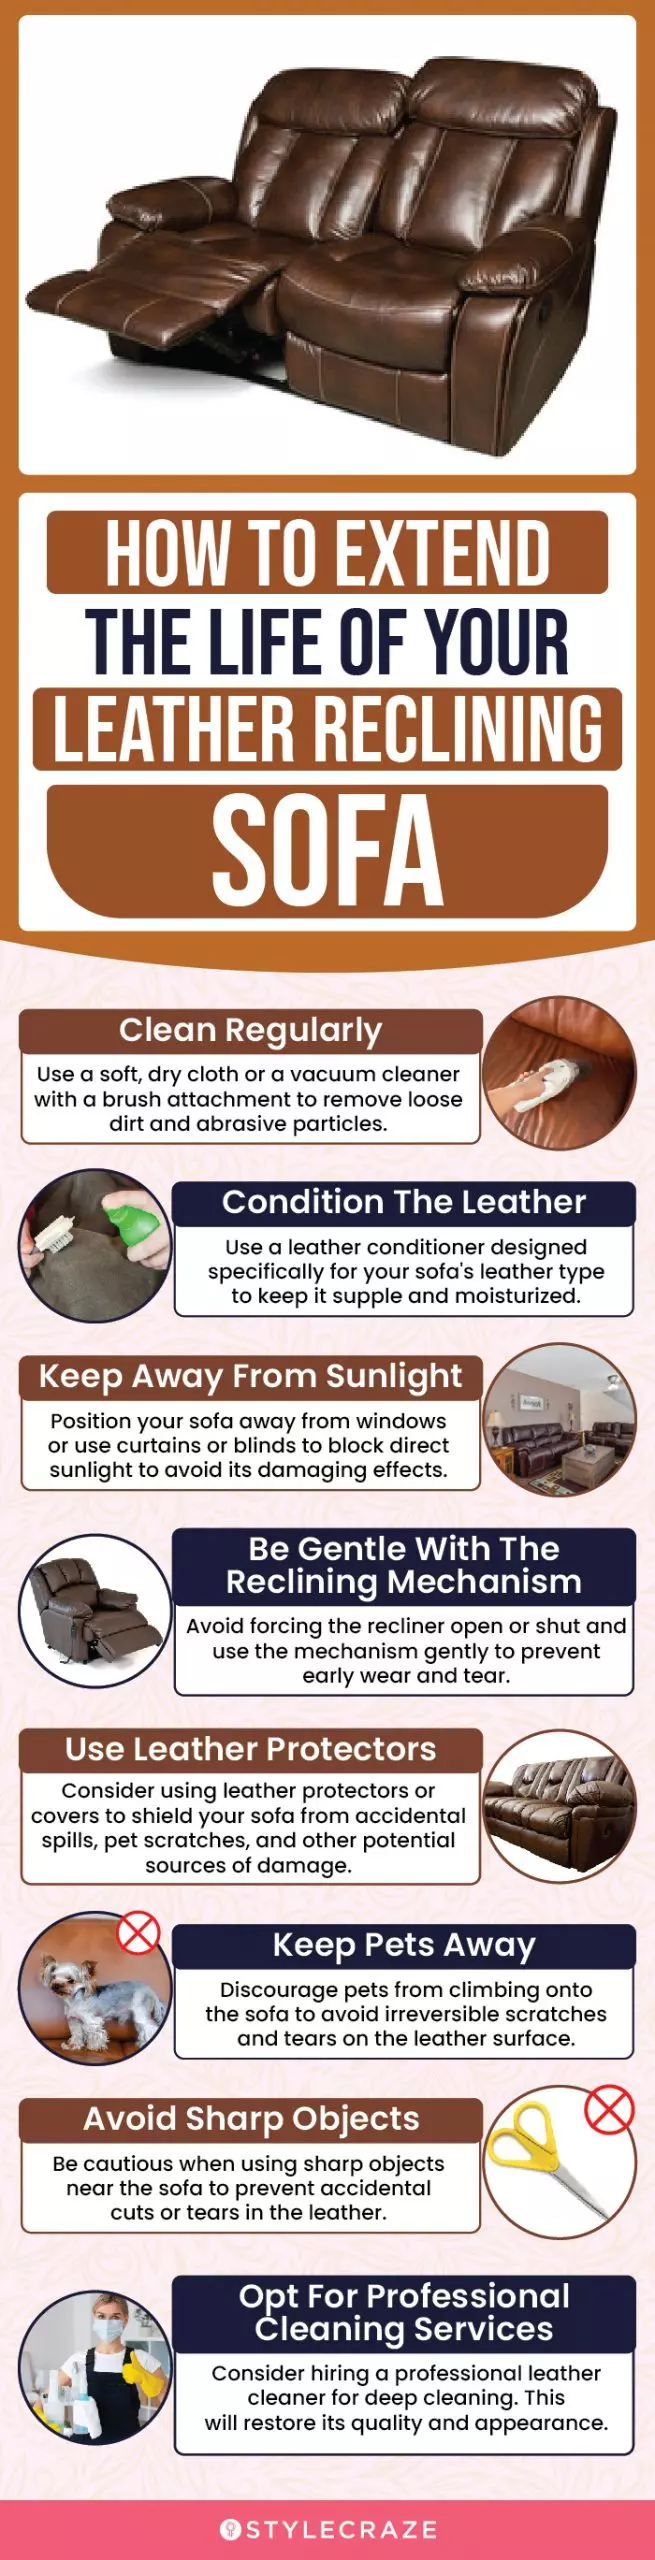 How To Extend The Life Of Your Leather Reclining Sofa (infographic)